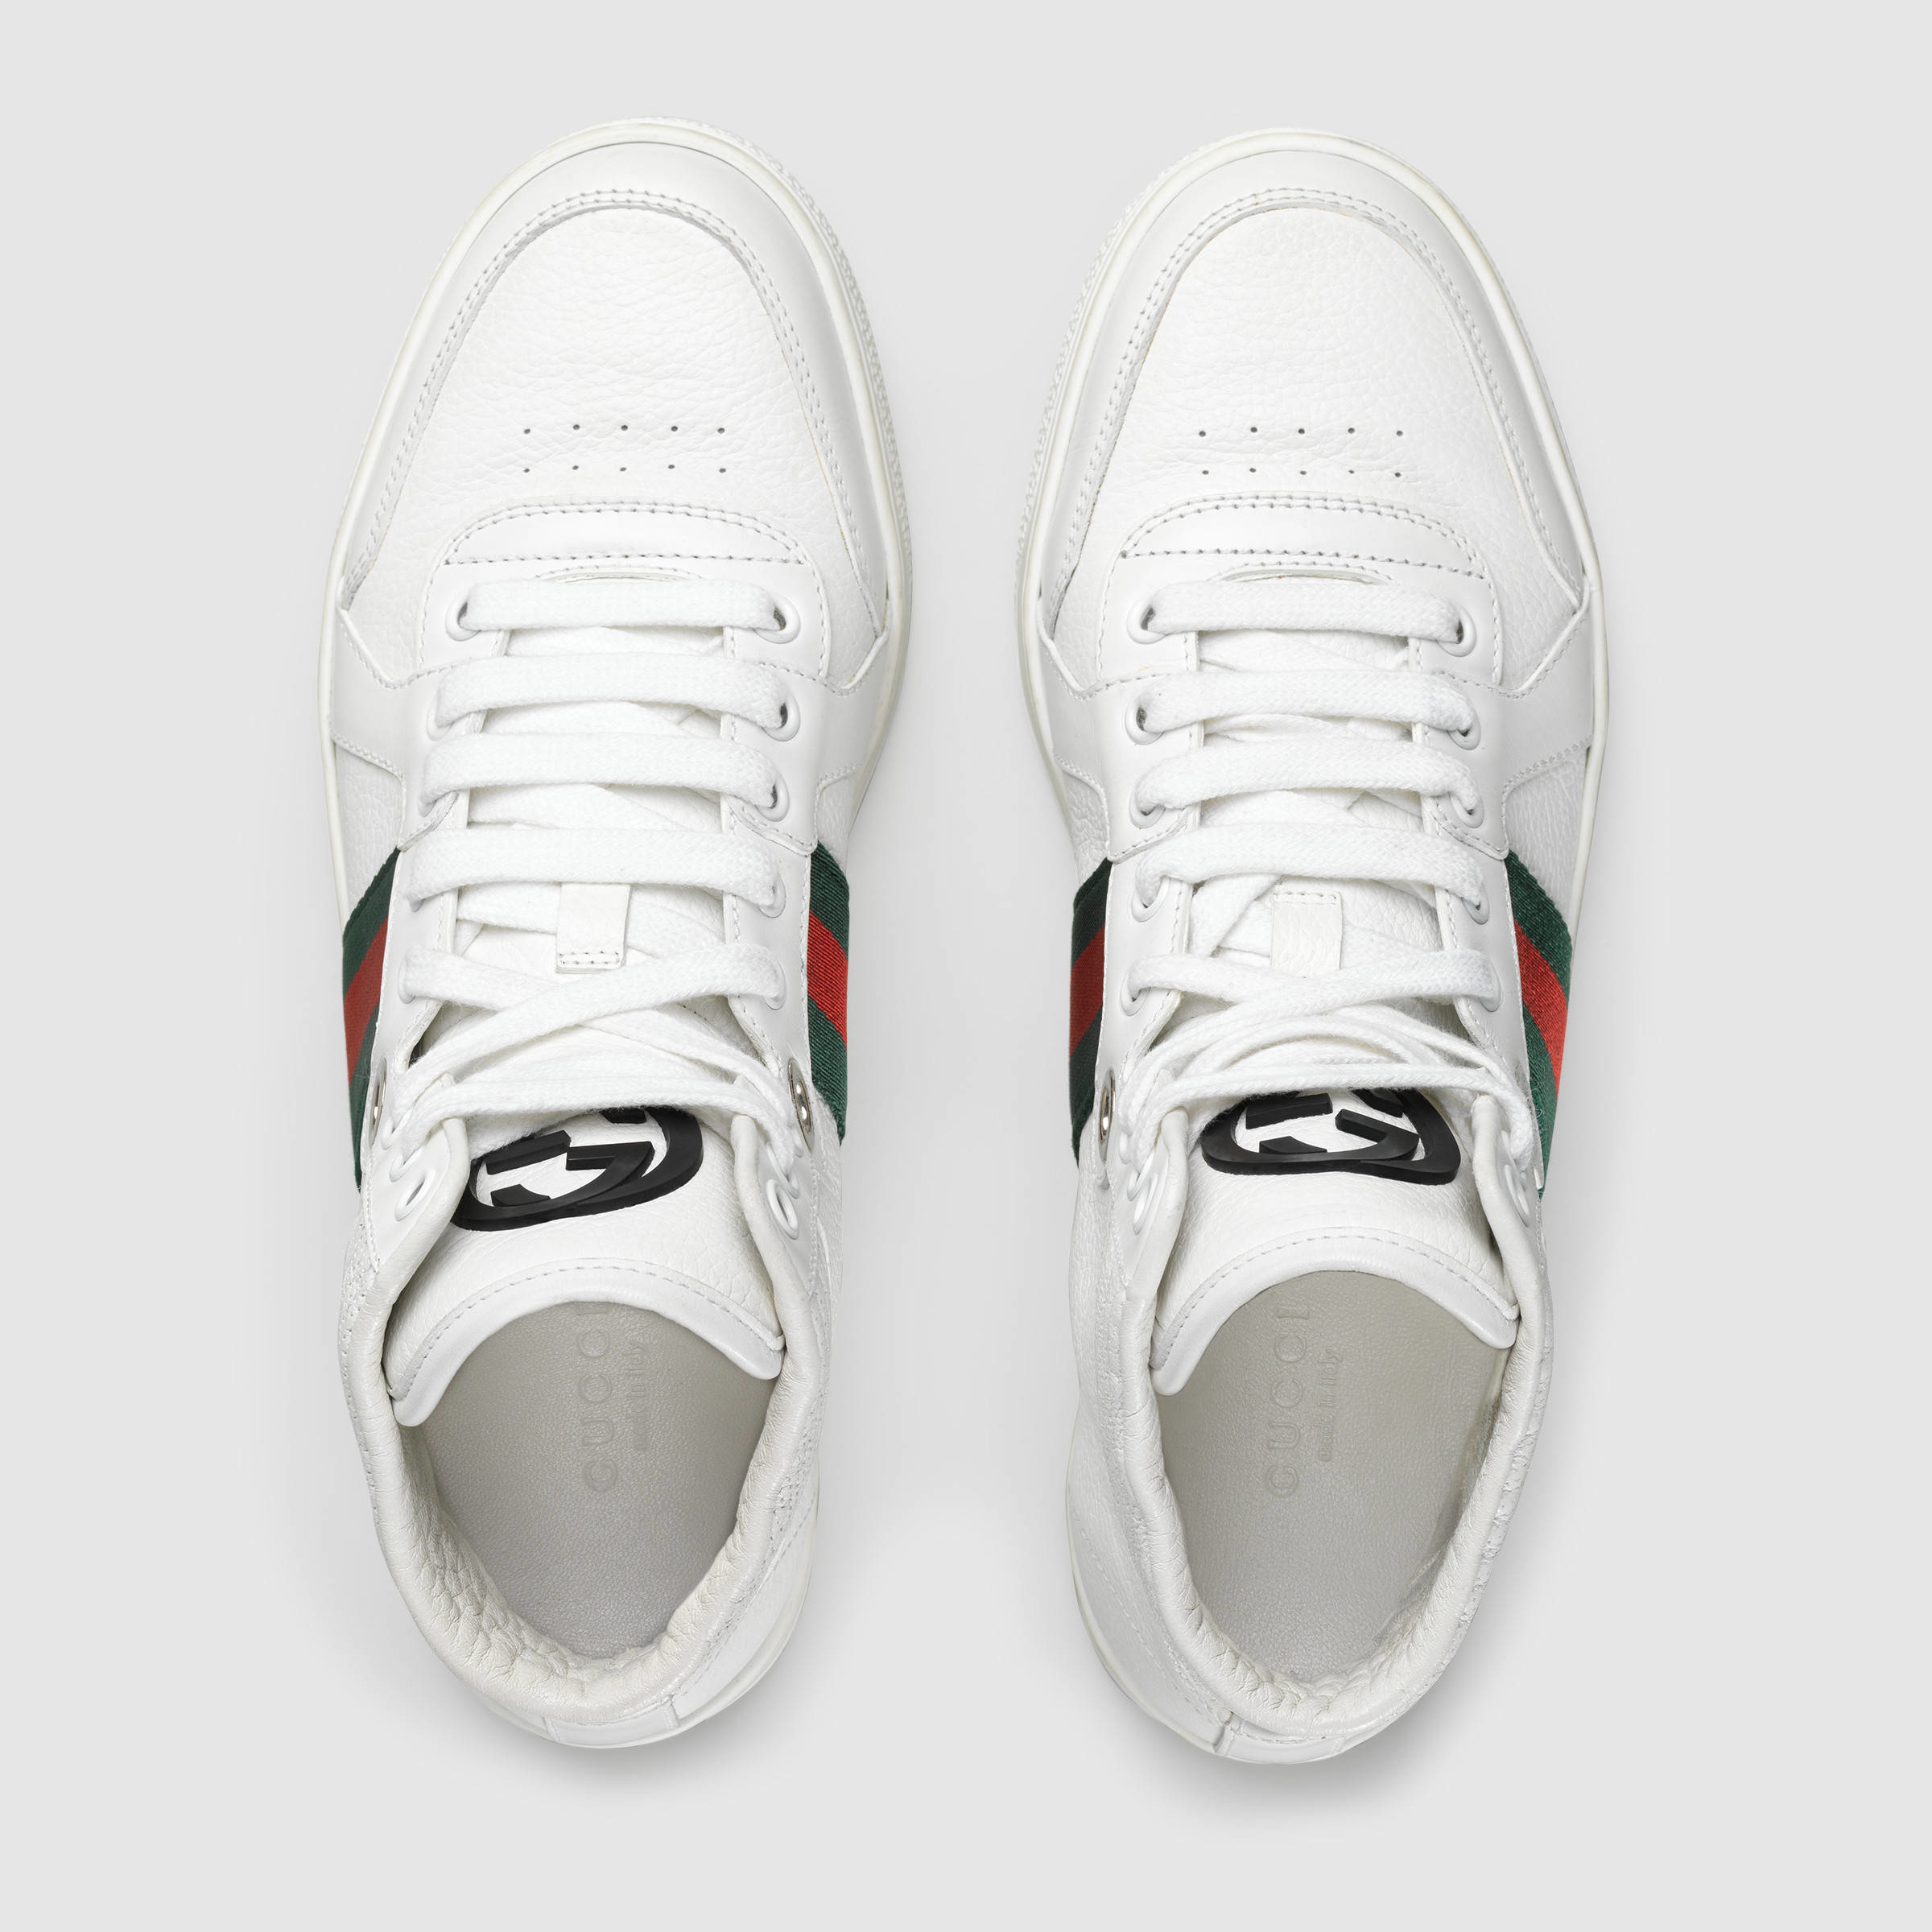 Gucci High-top Leather Sneaker in White Leather (White) - Lyst